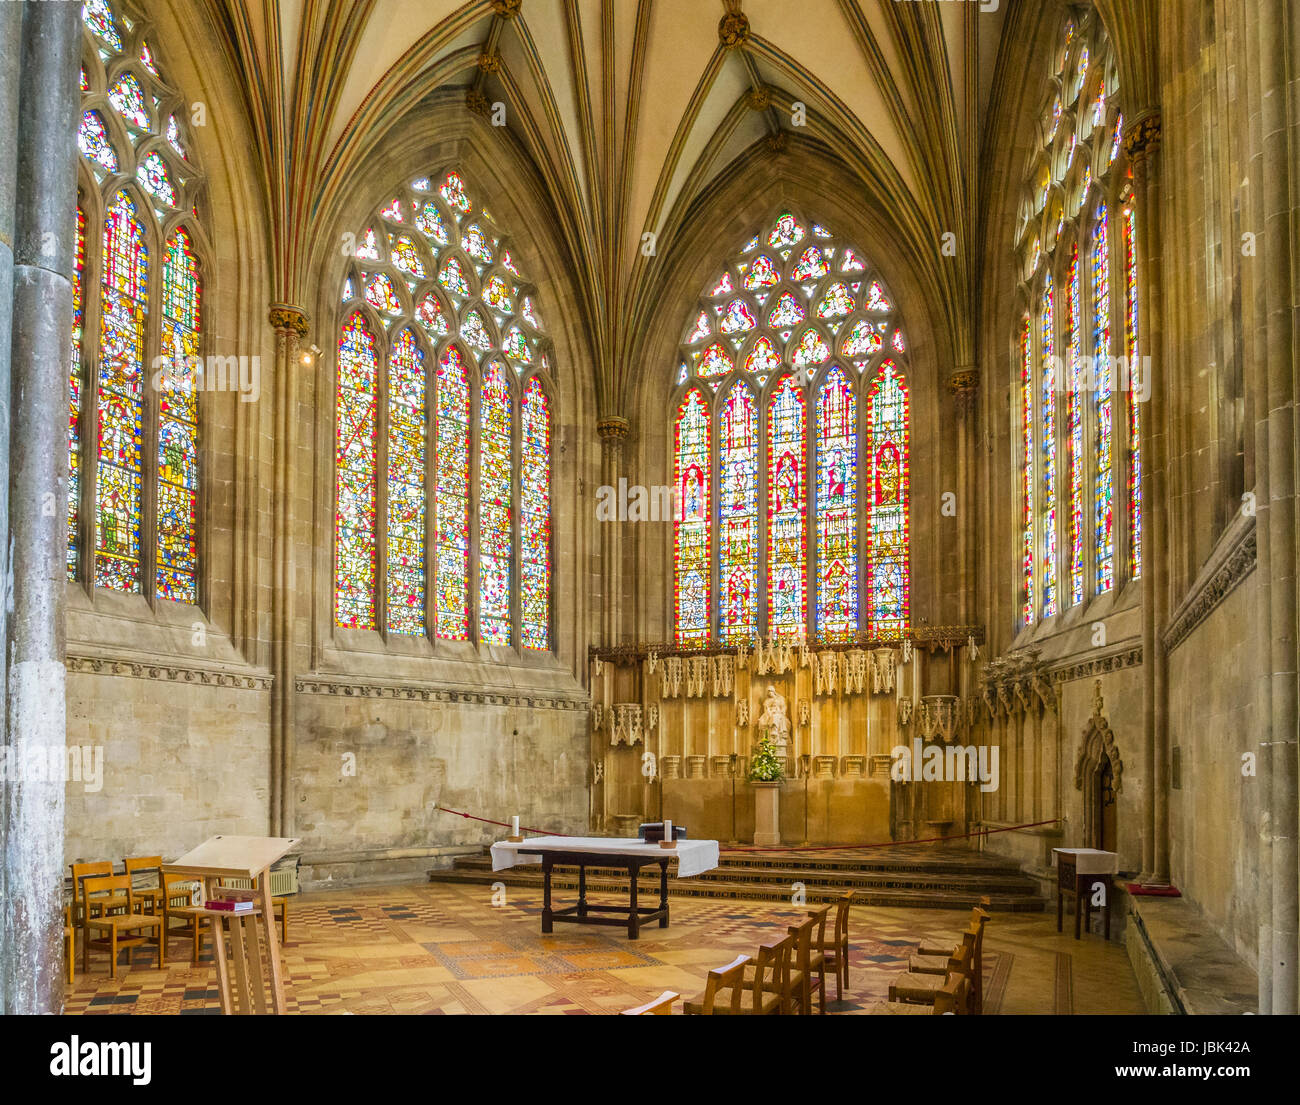 8 June 2017: Wells, Somerset, England - The Lady Chapel at the East end of Wells Cathedral, Wells, Somerset, England, UK Stock Photo